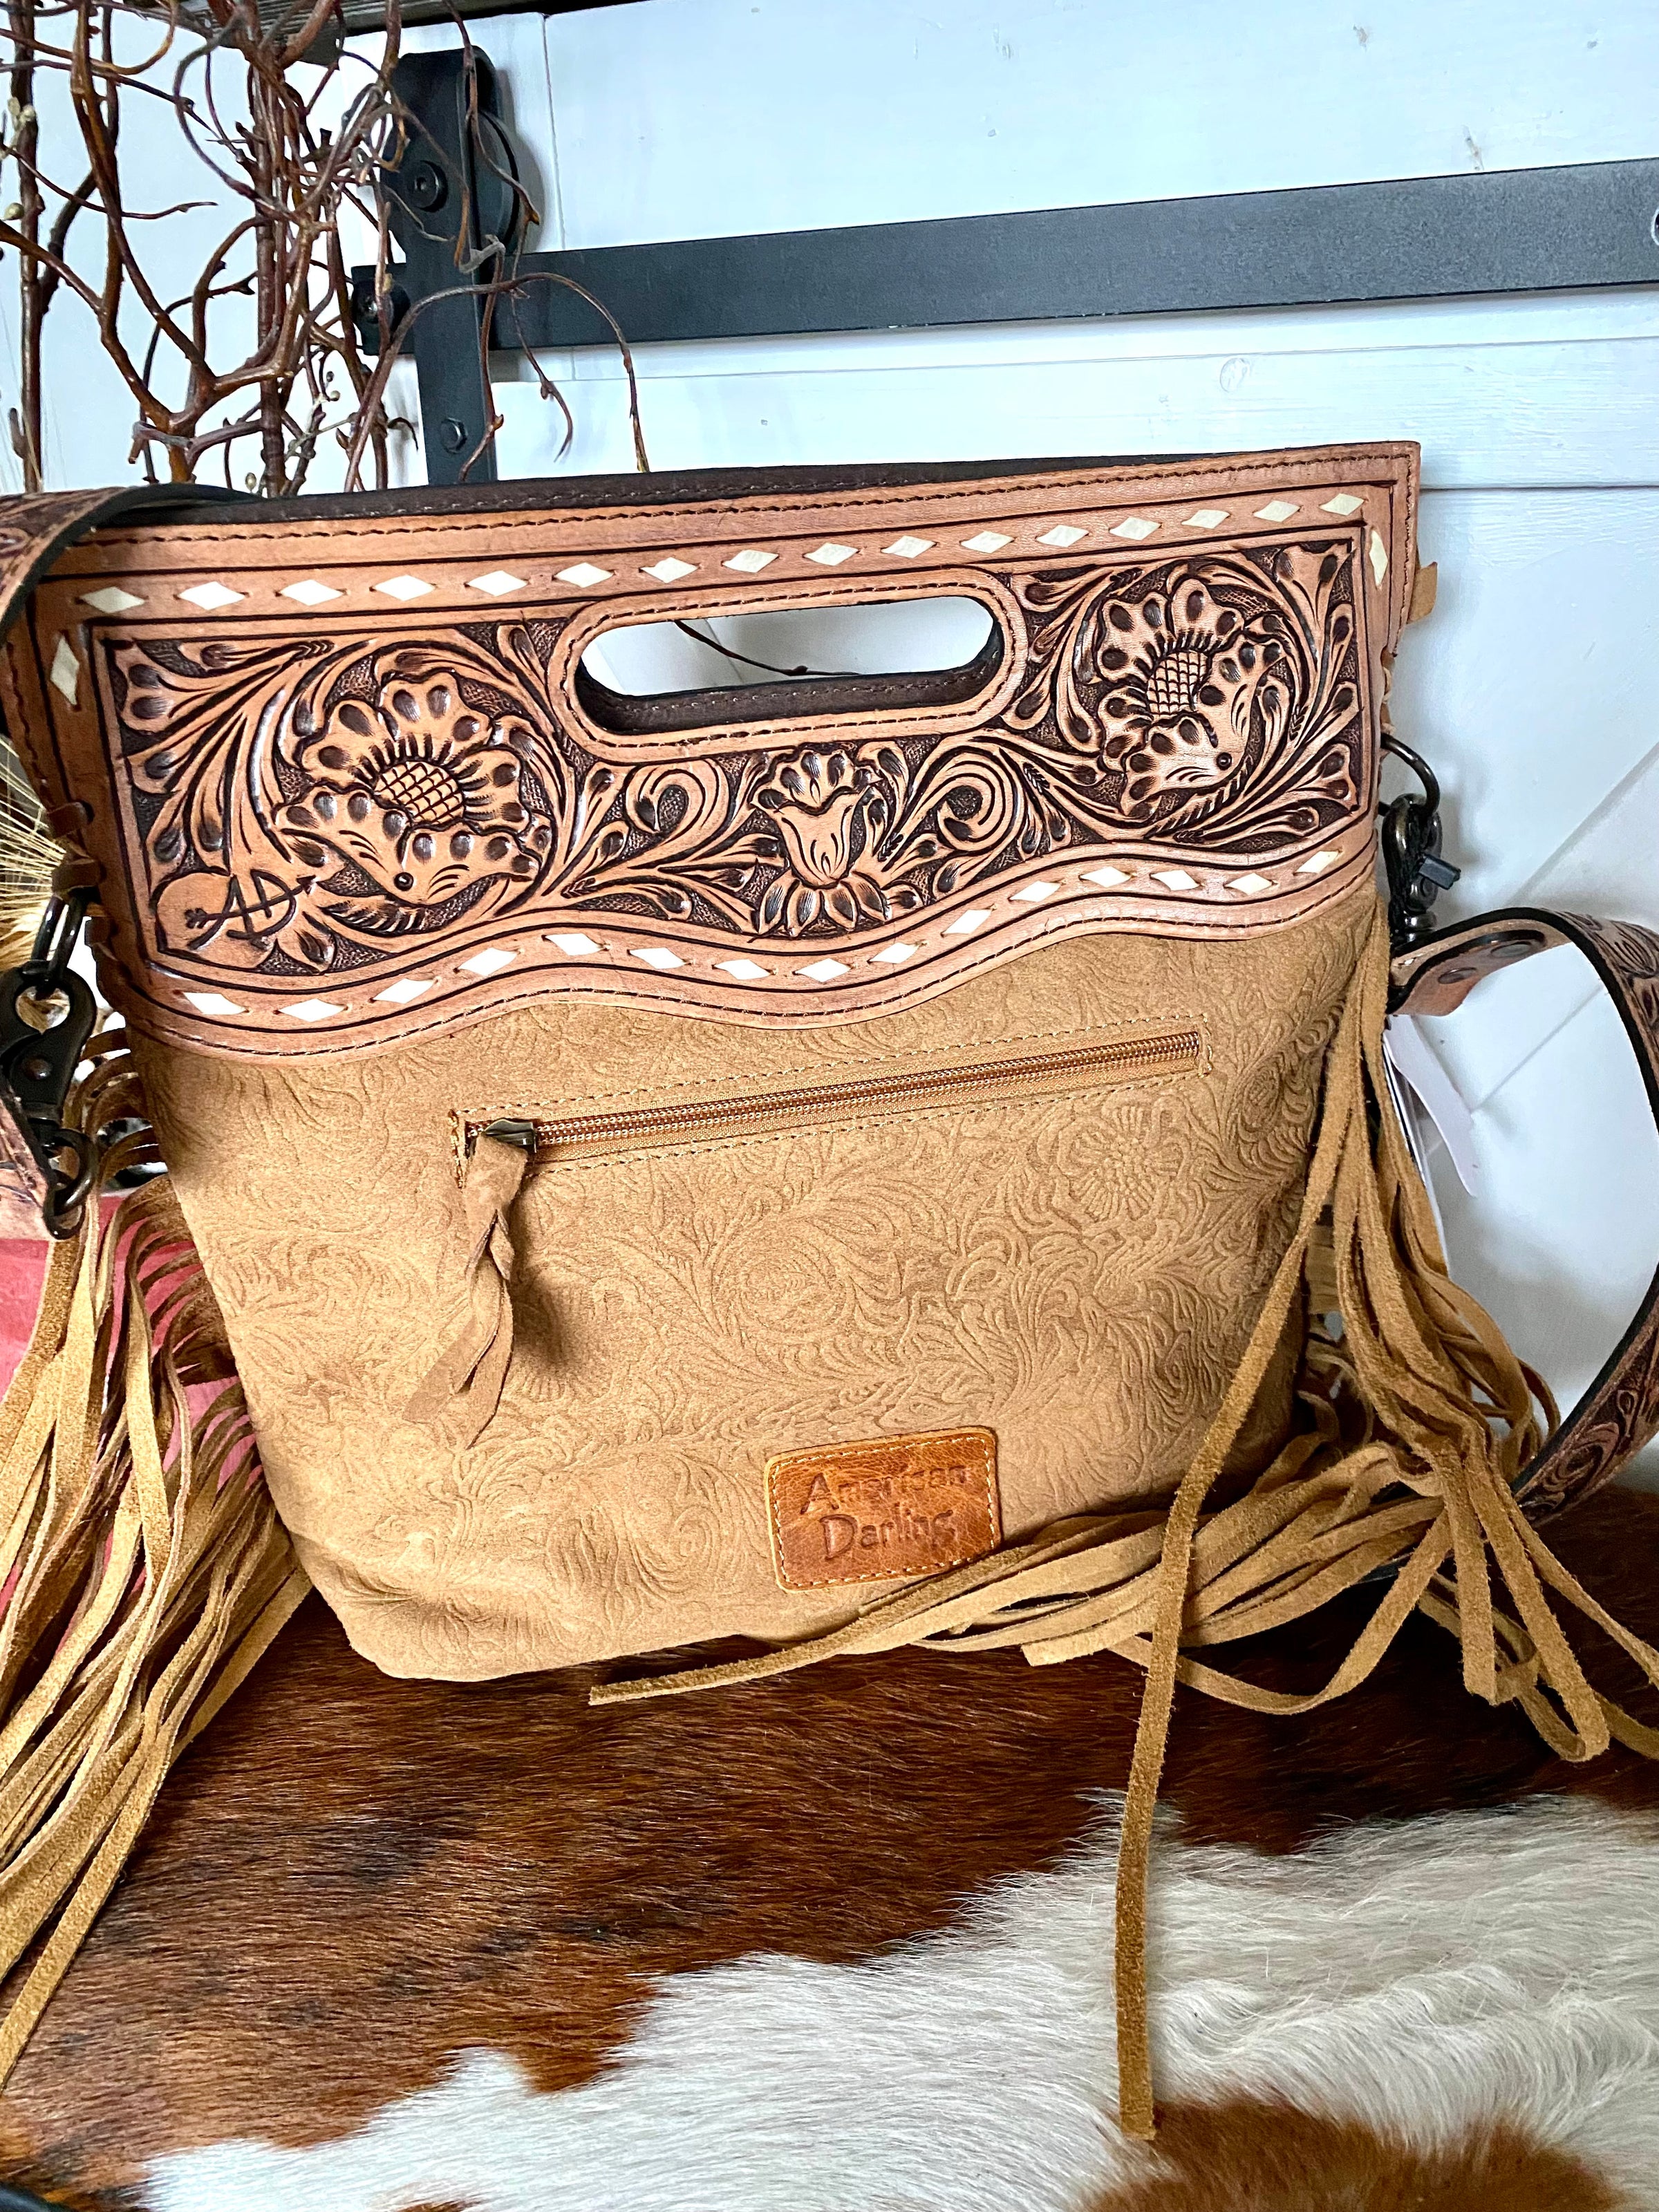 The Pioneer Woman Tooled Faux Leather Crossbody Bag with Studs